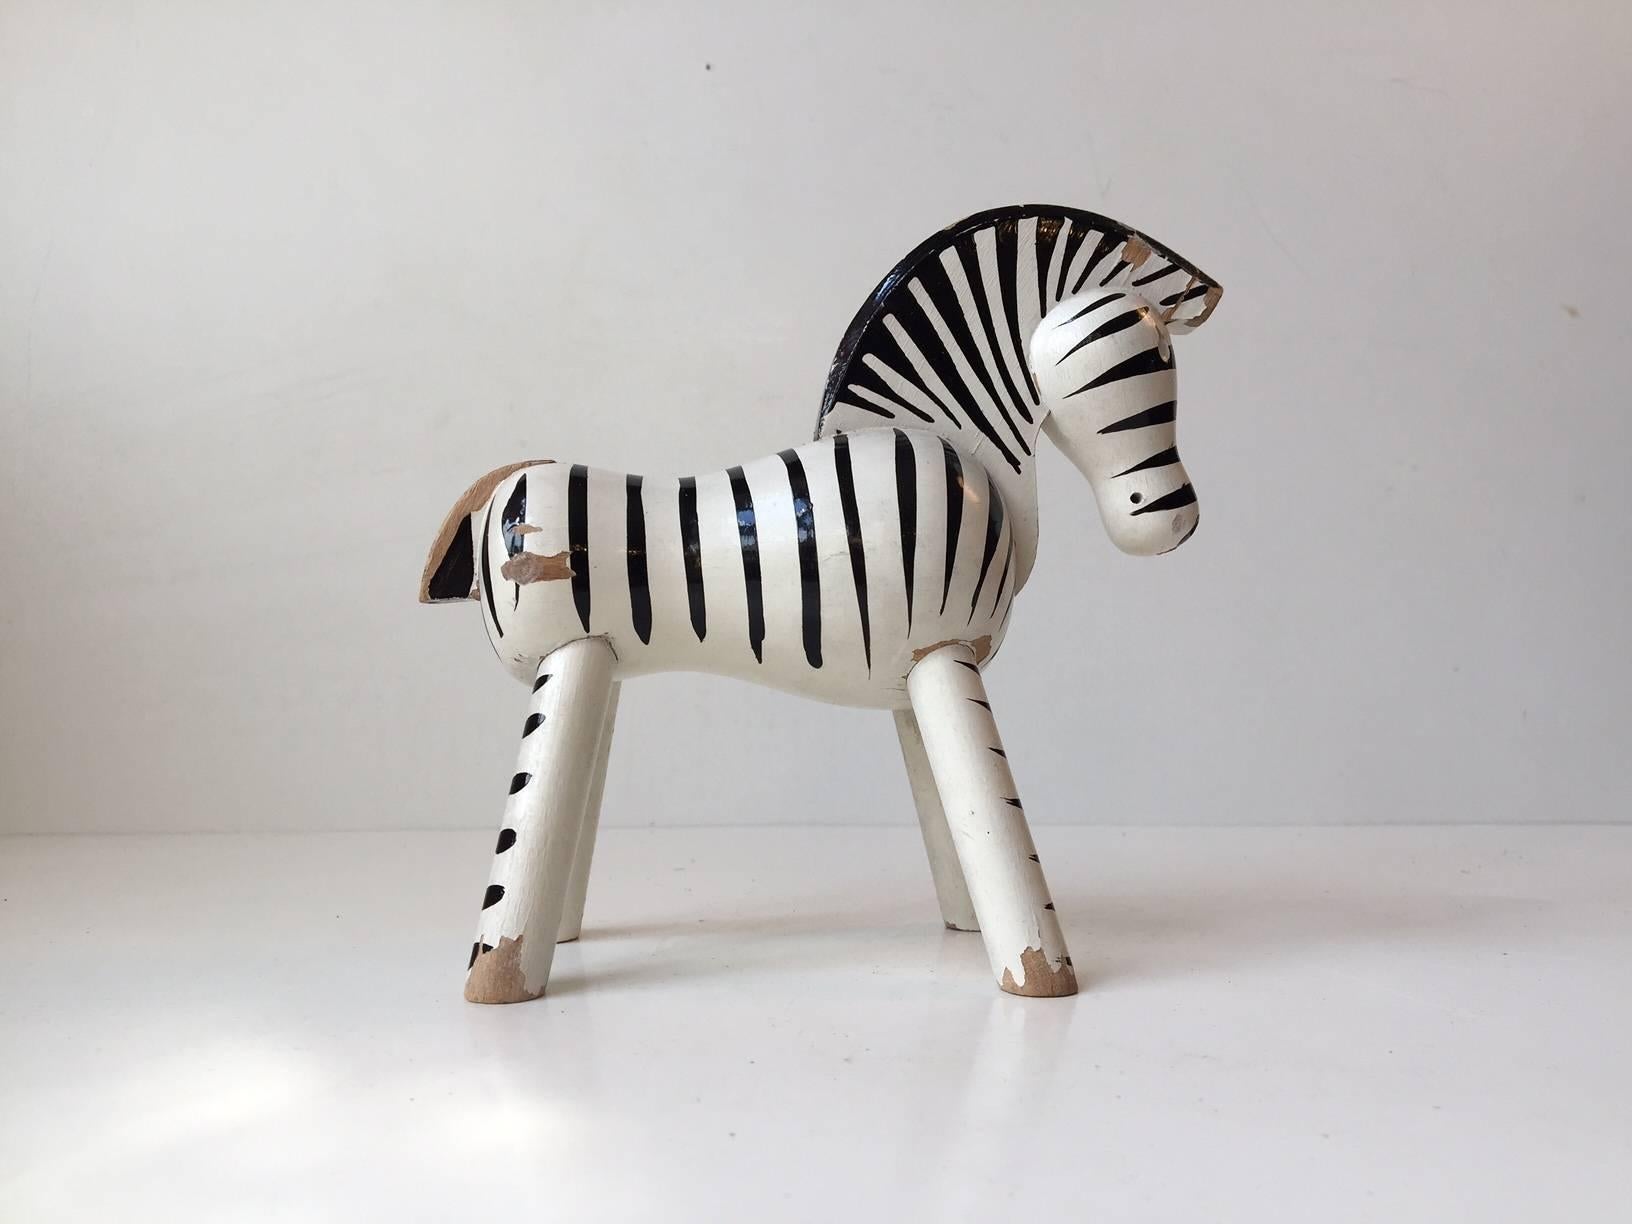 Wooden Toy Zebra Figurine. Material: Beech. Color: White and black.
Design: Kay Bojesen. Origin: Denmark. Period: Manufactured in the 1950s (Designed in 1935). Measurements: Height approximately 14 cm (5.6 inch). Length: Approximately 15 cm (6